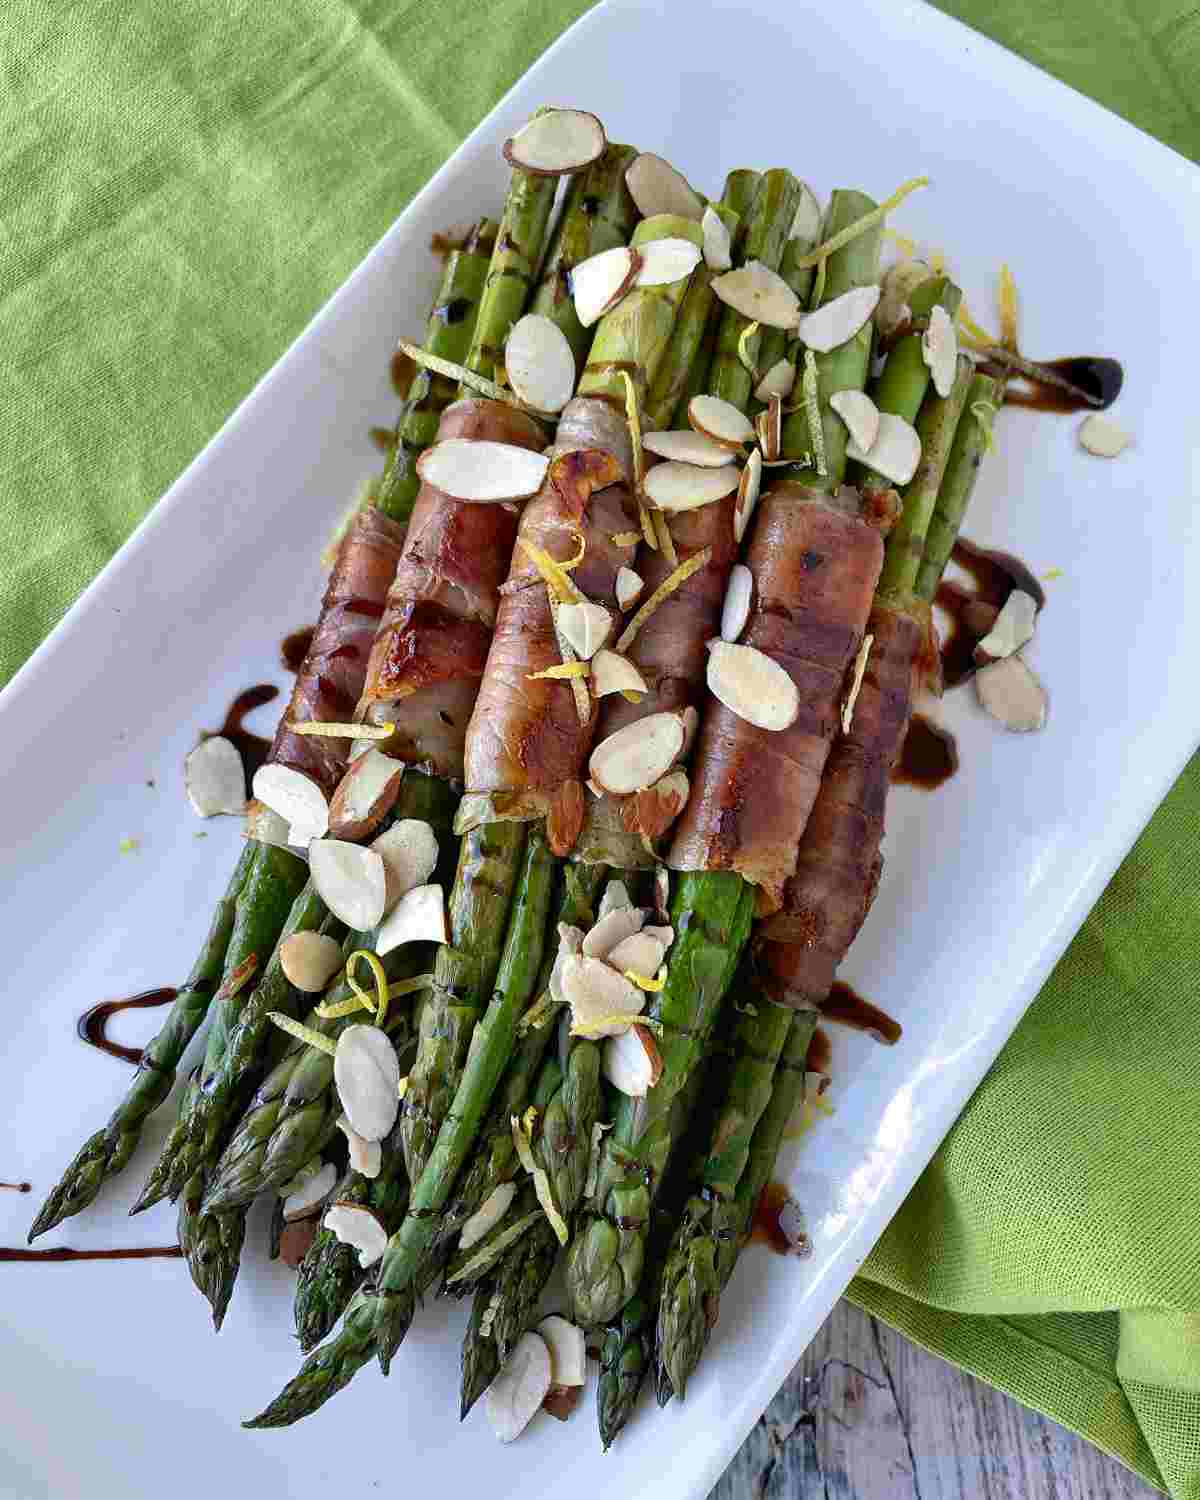 Asparagus wrapped in prosciutto served on a white dish